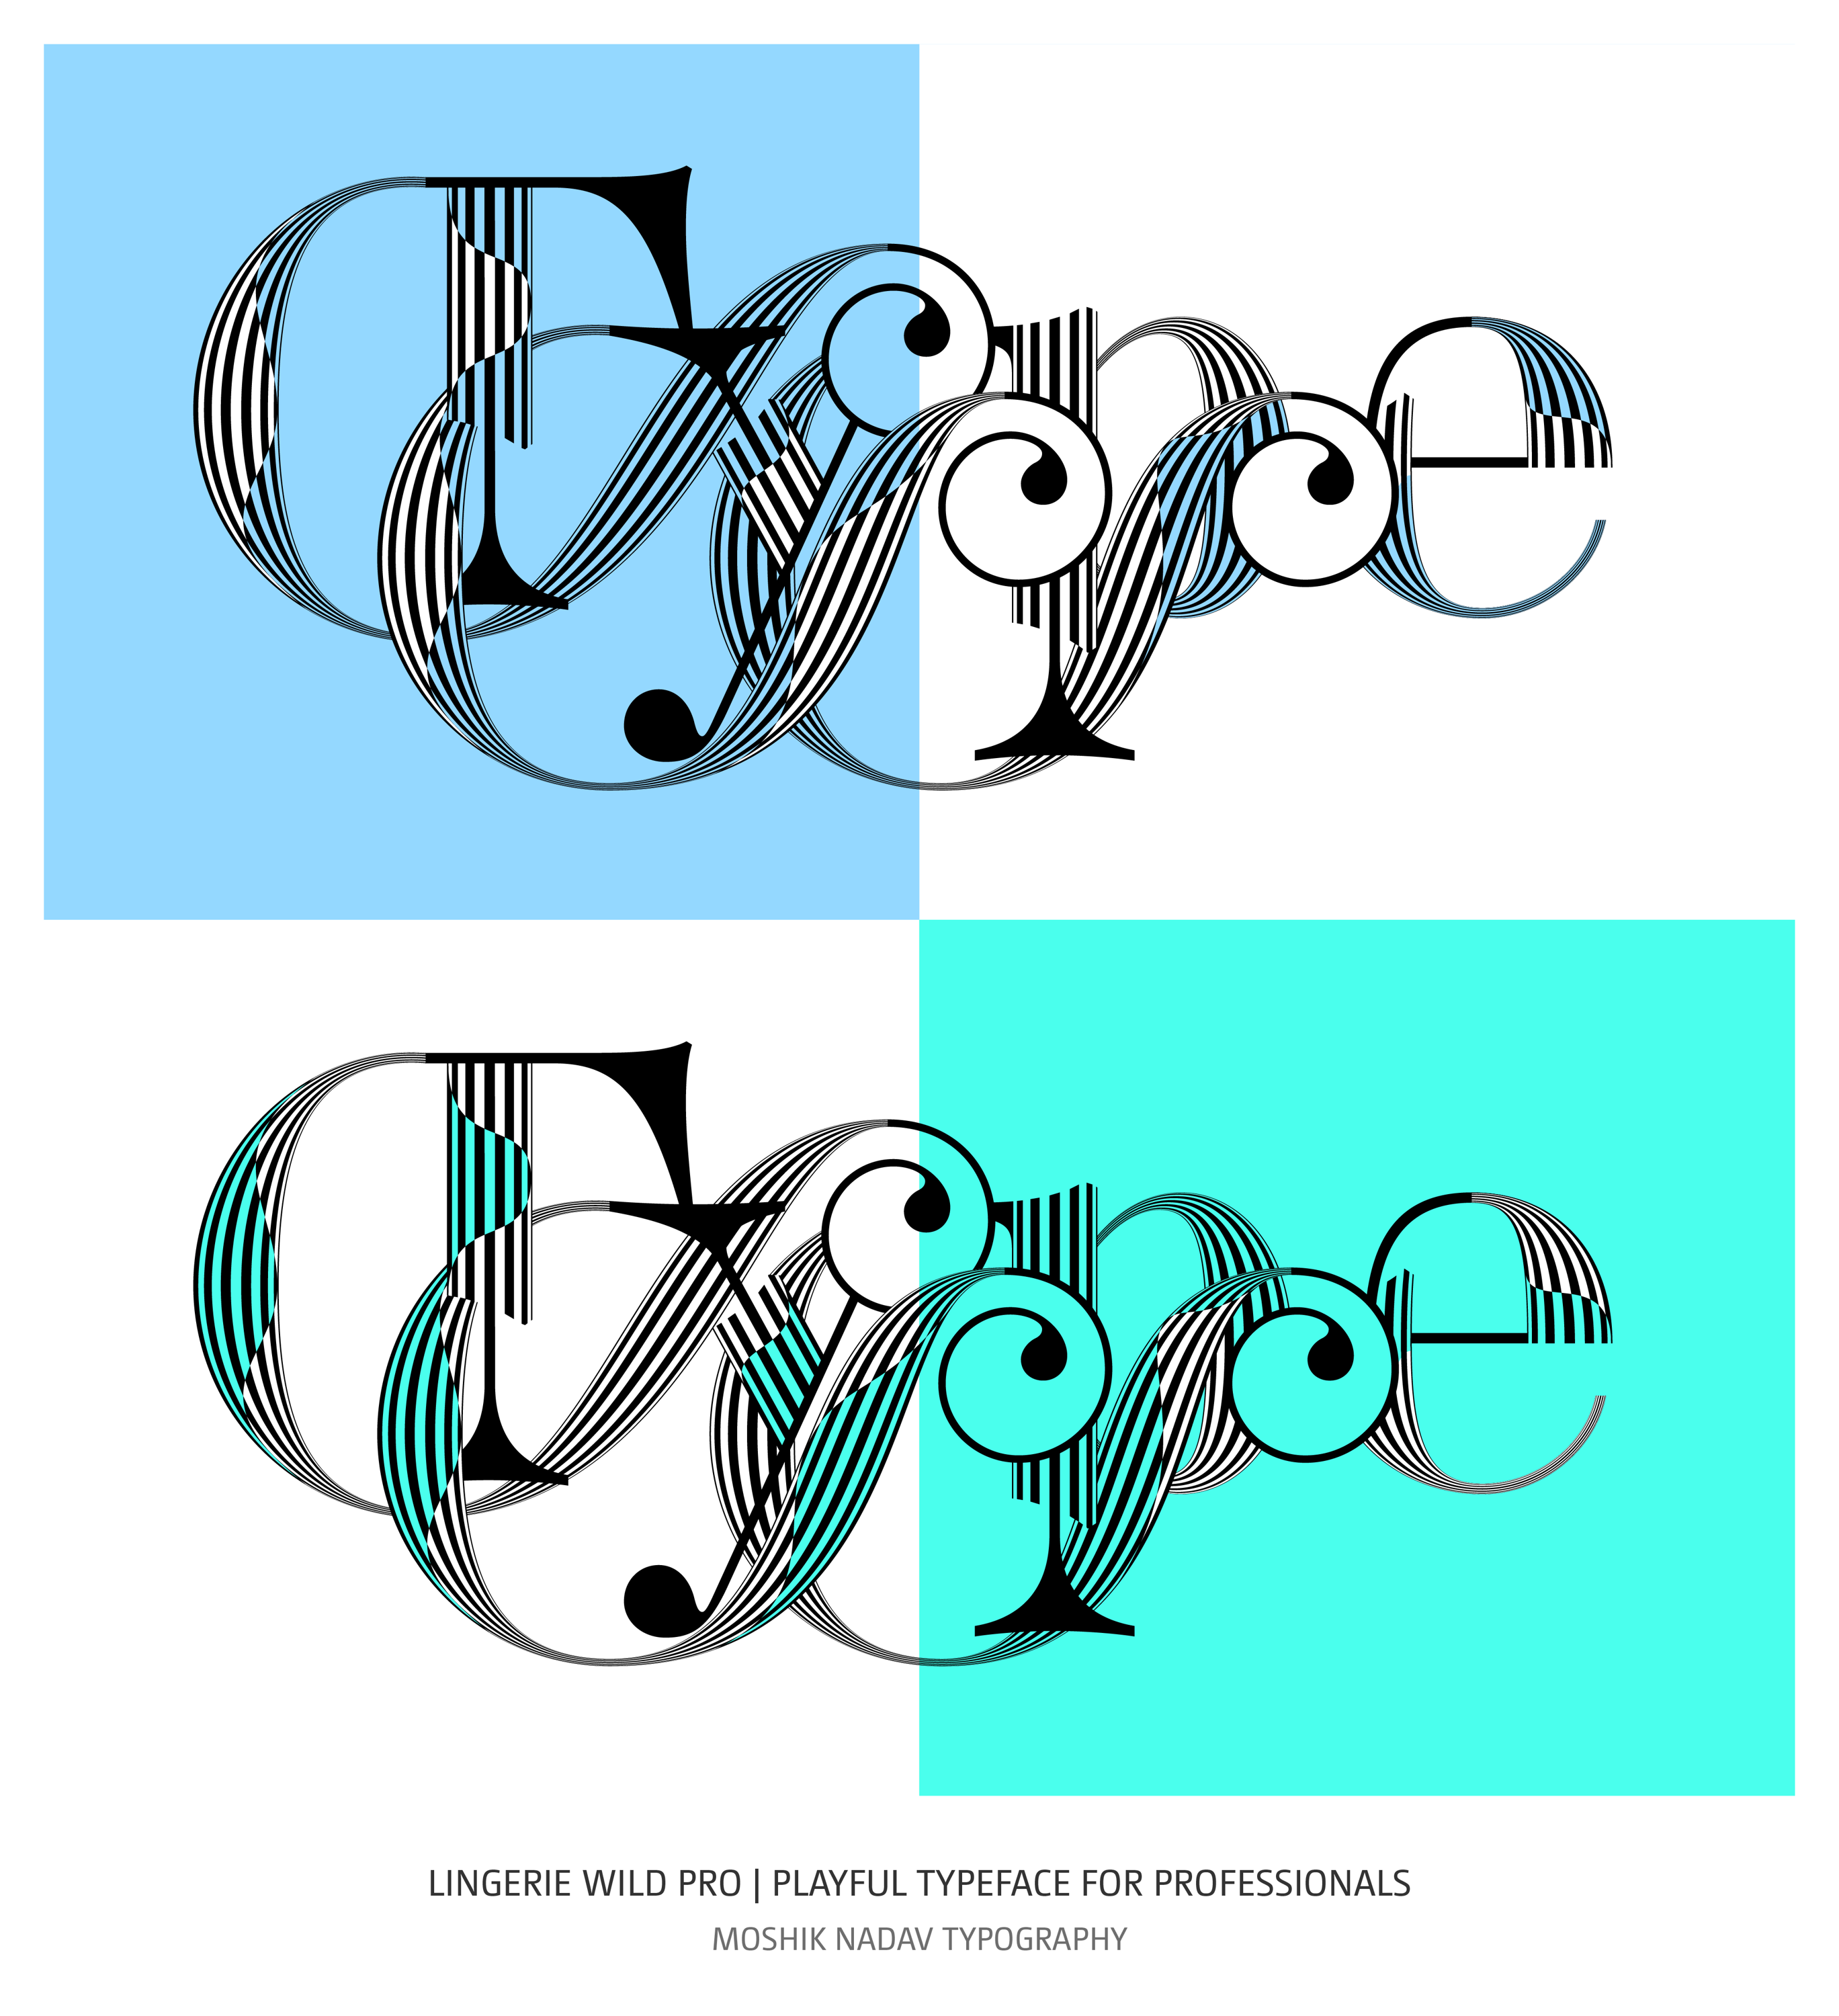 Cool ampersand, Unique ampersand, Ampersand unique, Playful ampersand, Lingerie Wild Pro, Playful Typeface, Sexy fonts, Sexy Typeface, Sexy Typography, Fashion Fonts, Fashion Typeface, Fashion Typography, Segol Typeface, Vogue fonts, Must have fonts 2023, Best fonts 2023, Fashion magazines fonts